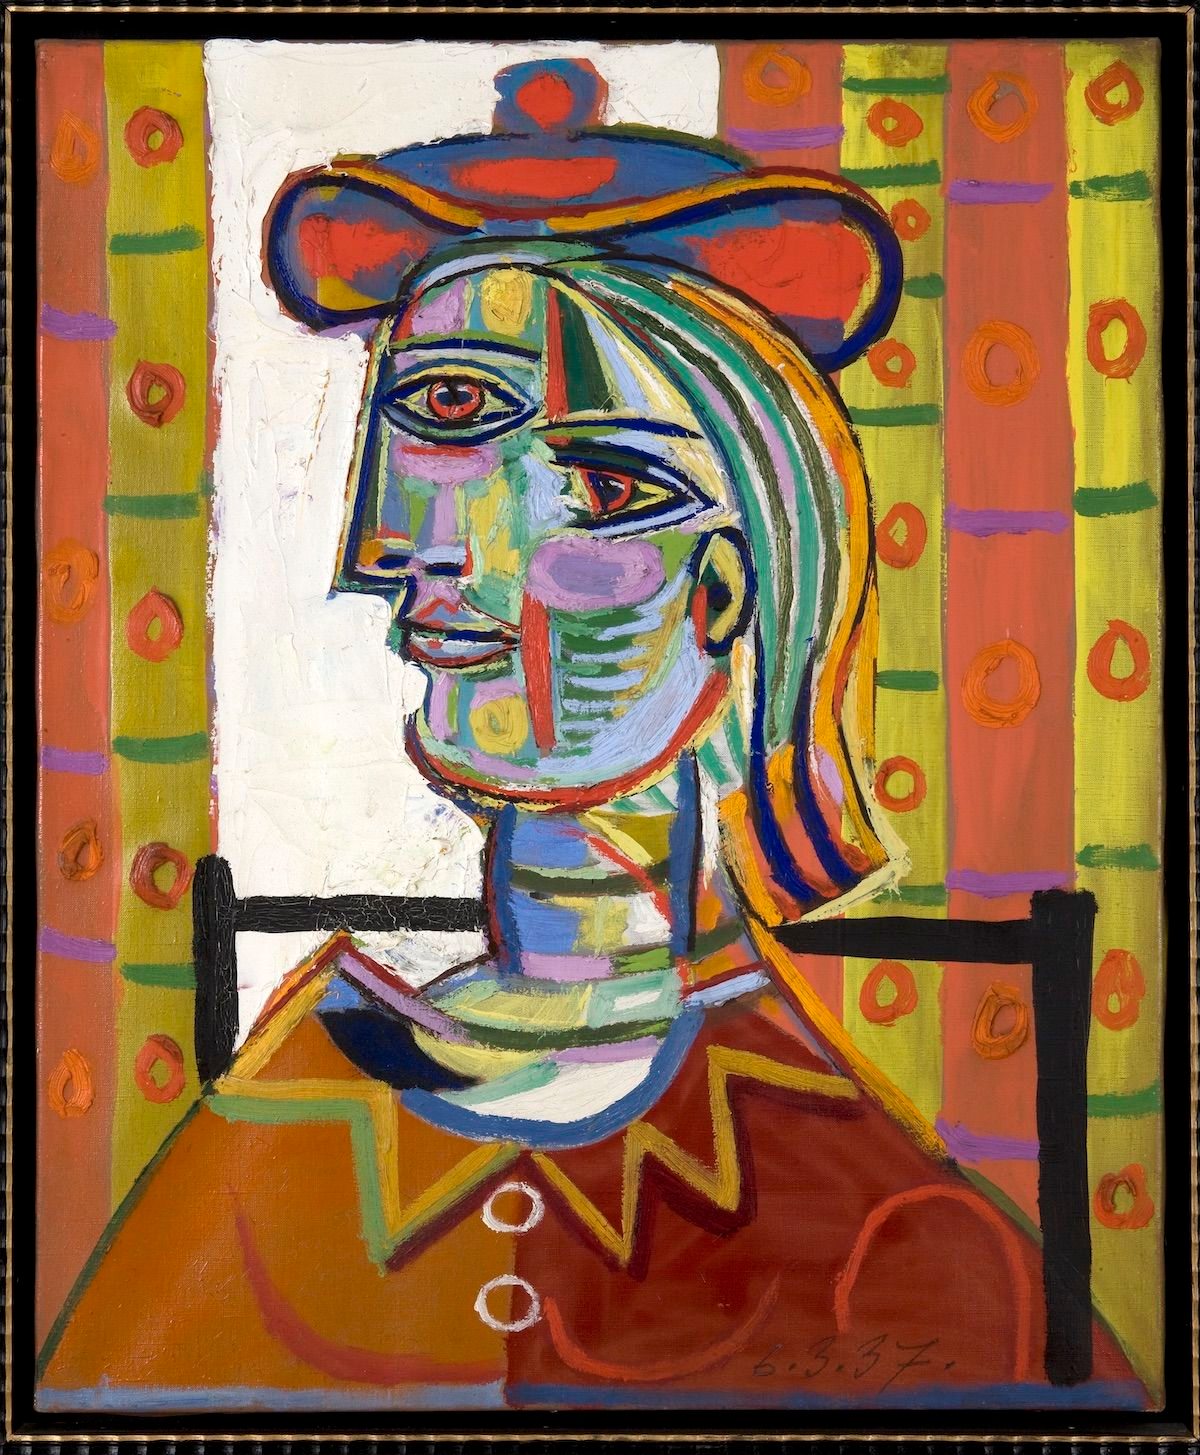 Pablo Picasso, Femme au beret et la collerette (Woman with Beret and Collar), 1937. © Estate of Pablo Picasso / Artists Rights Society (ARS), New York. Courtesy the Donald B. Marron Family Collection, Acquavella Galleries, Gagosian, and Pace Gallery.